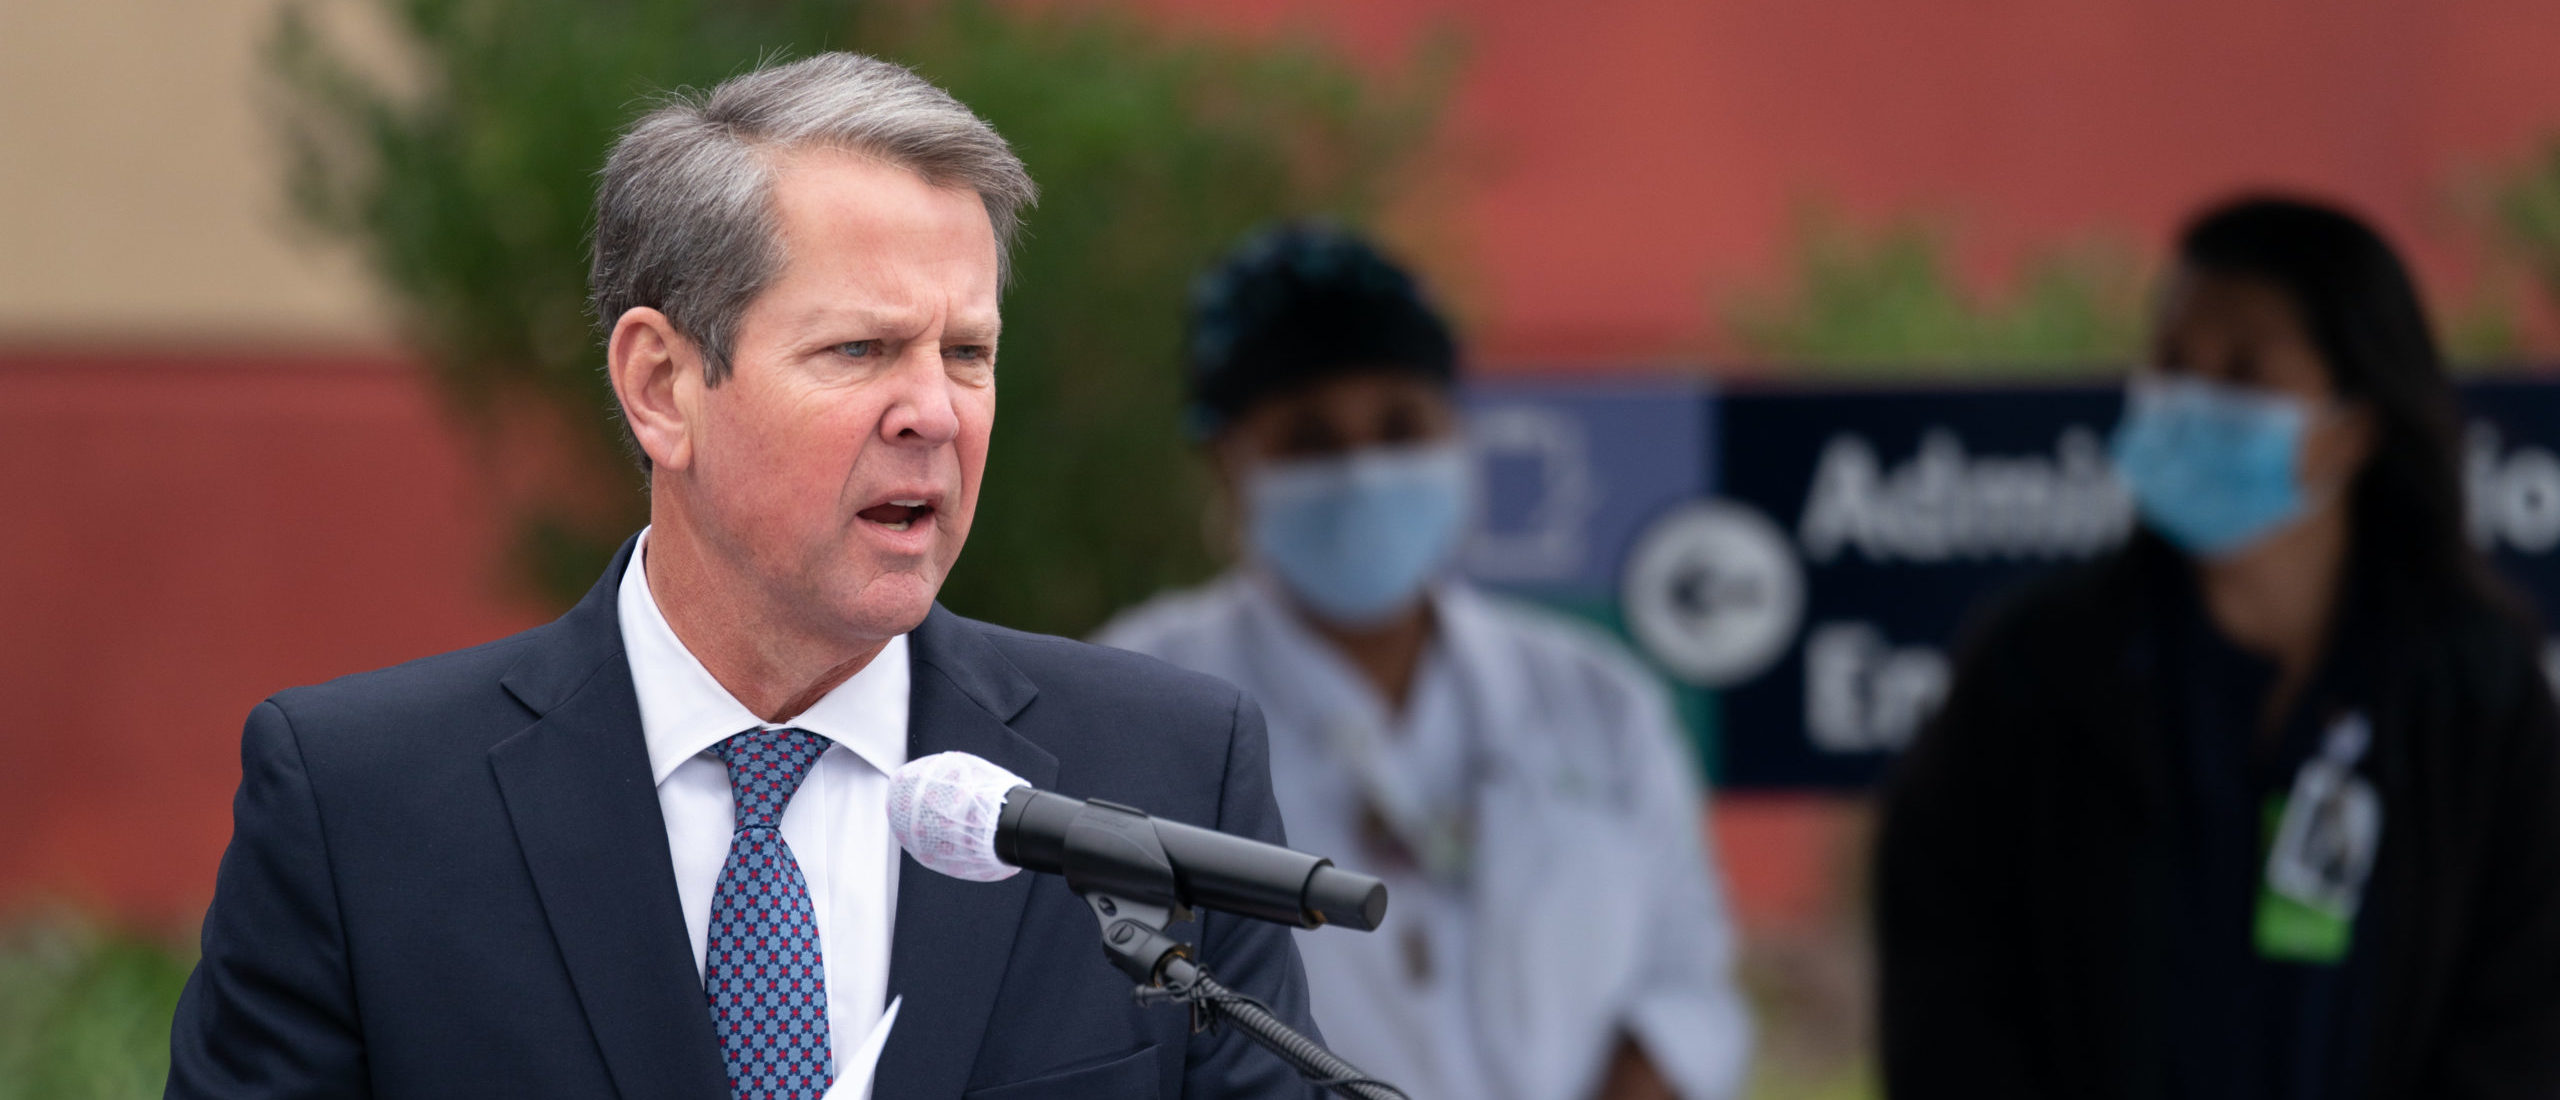 Georgia Gov. Brian Kemp speaks to the media before health care workers receive the Pfizer-BioNTech COVID-19 vaccine outside of the Chatham County Health Department on December 15, 2020 in Savannah, Georgia. Kemp was on hand to witness initial administering of vaccines in the state. (Photo by Sean Rayford/Getty Images)